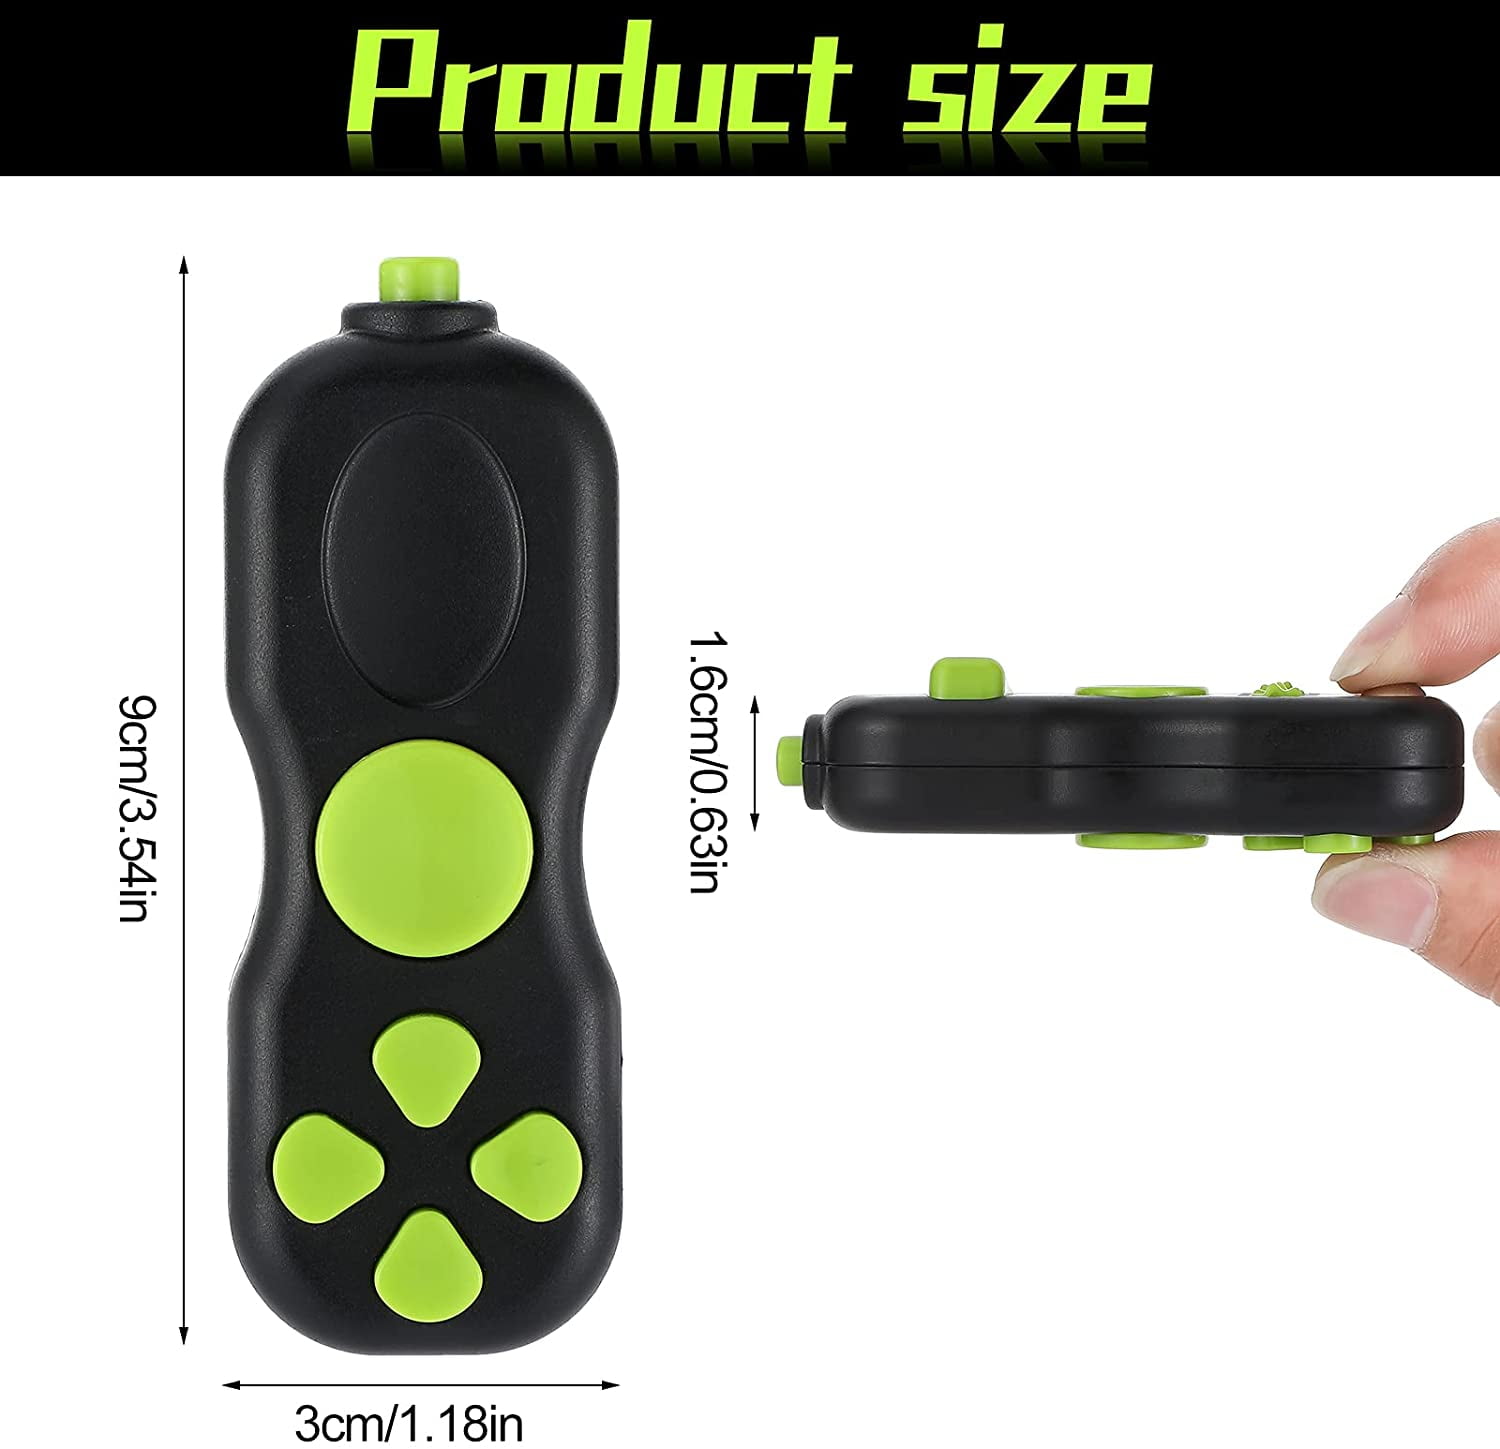 2 Pieces Fidget Toys Fidget Pad Handheld Game Pad Fidget Controller Pad Sensory Toy Pressure Reducer Fingertip Spiral Anxiety Relief Toy for Teens and Adults Anxiety and Stress Relief